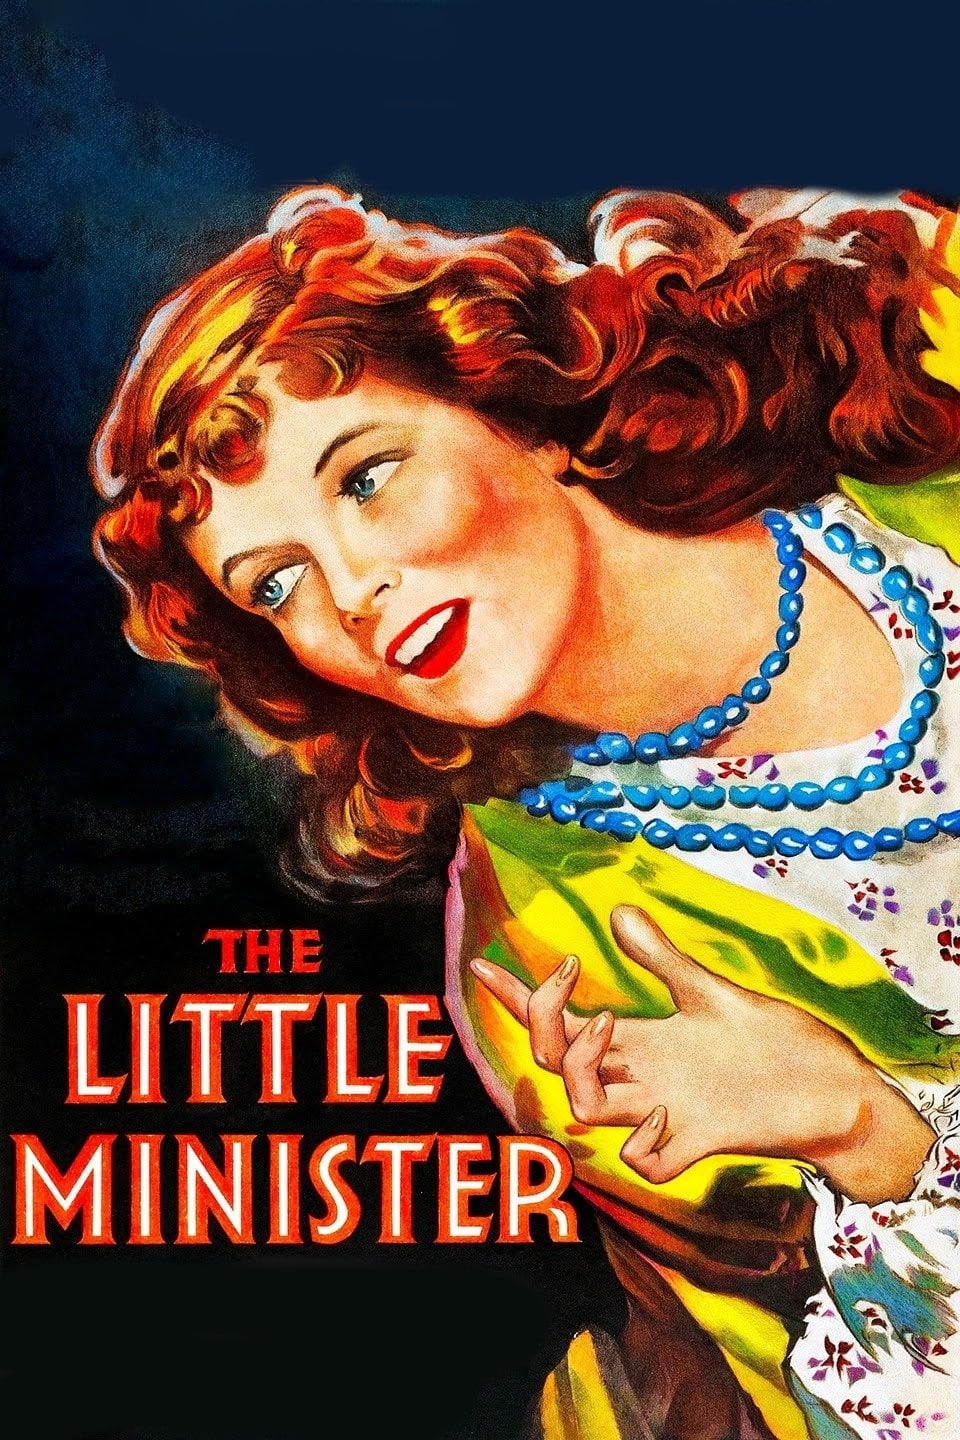 The Little Minister (1934)